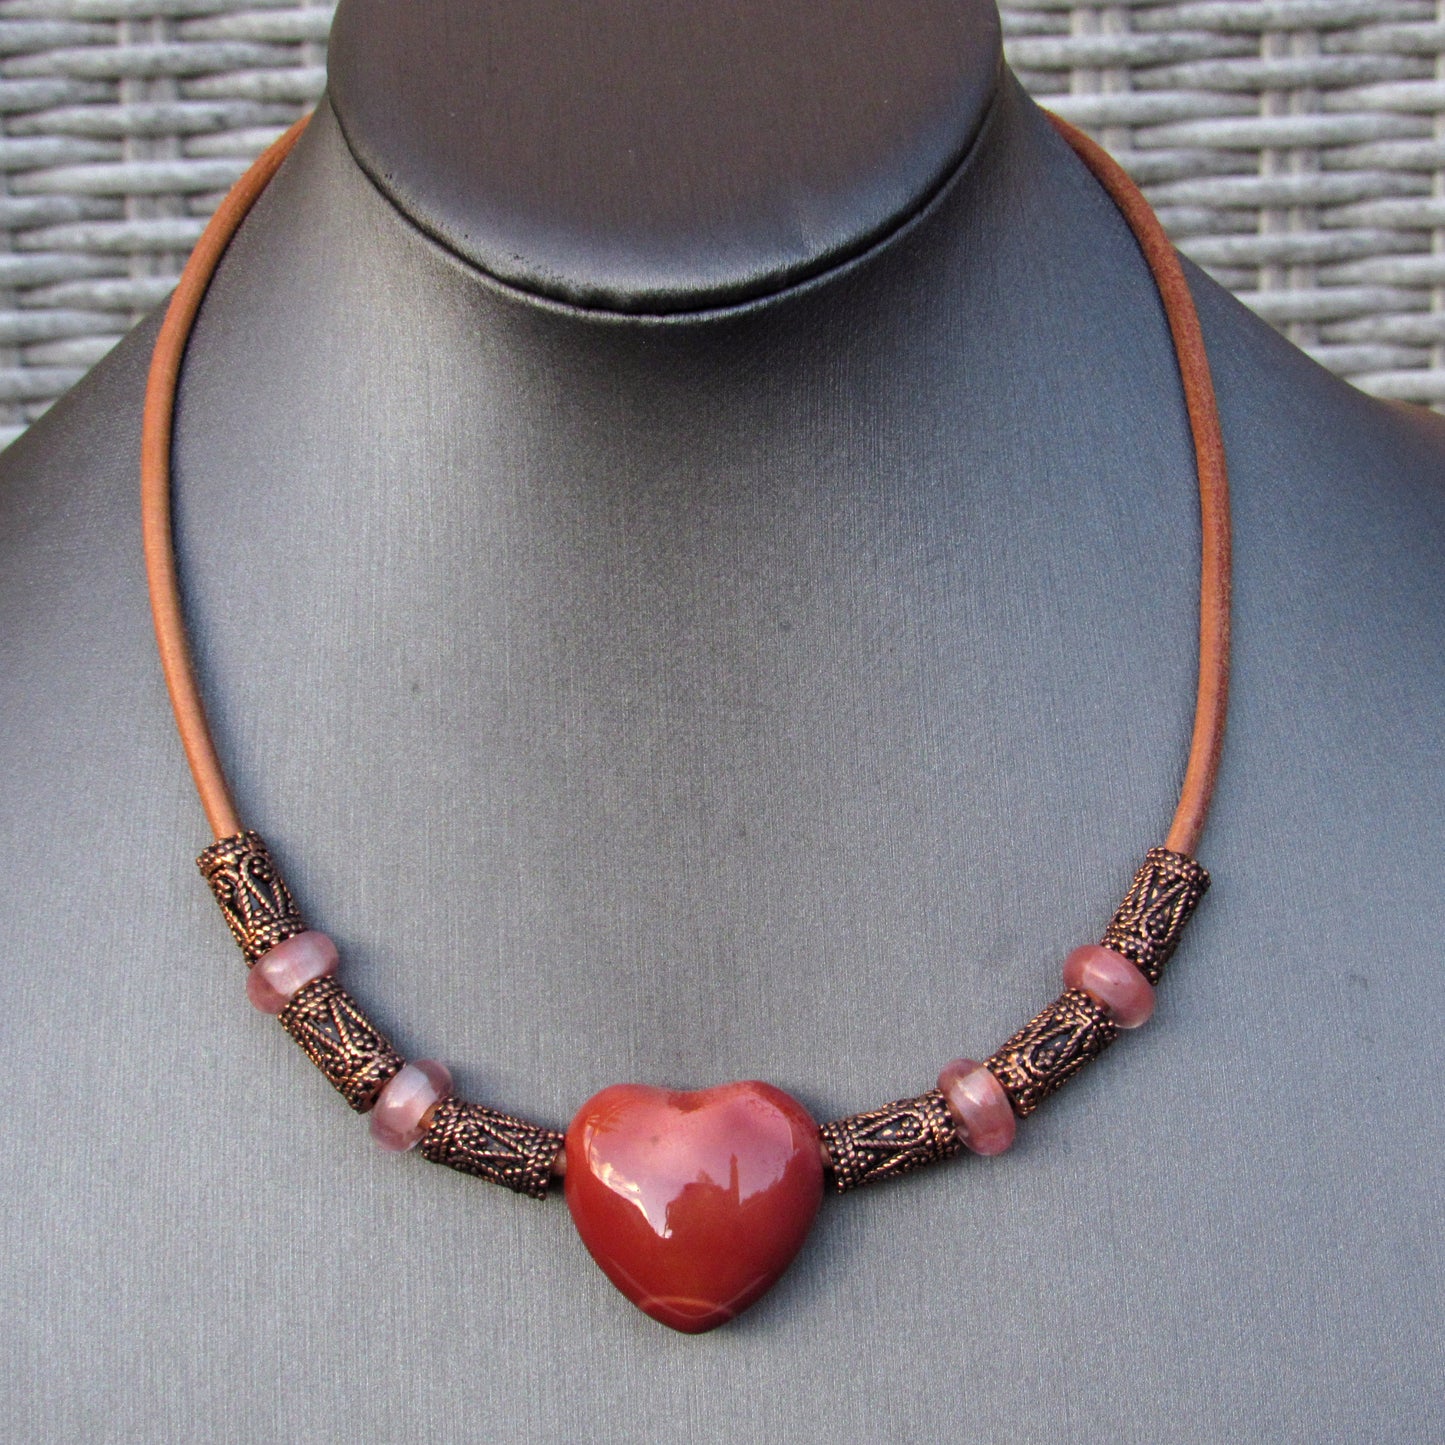 Mookaite gemstone Heart, Cherry Quartz, Copper, and Leather Necklace